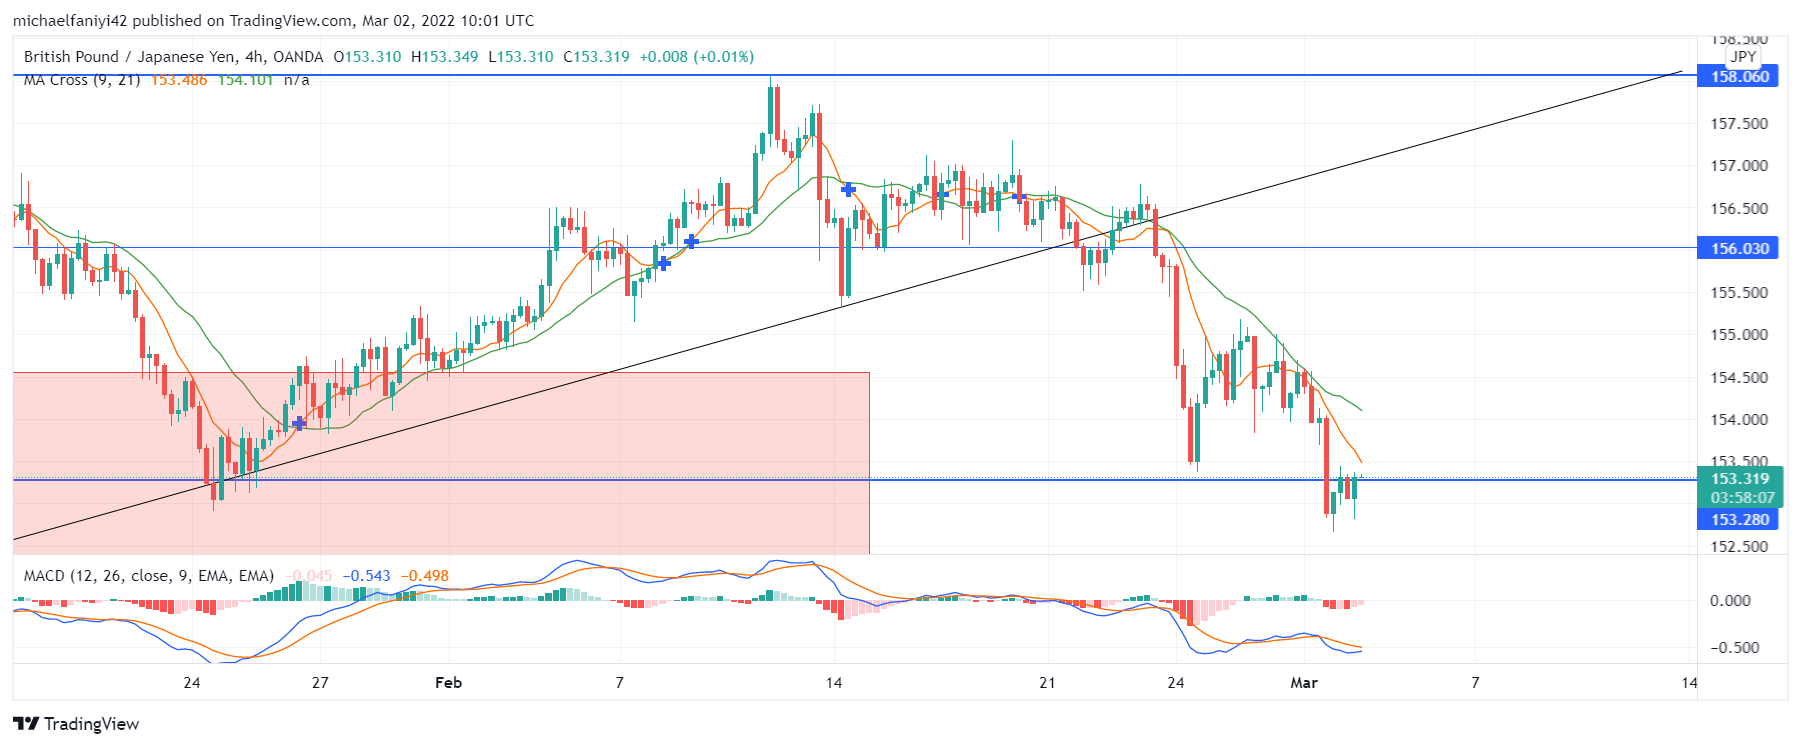 GBPJPY Bears Wield Stronger Influence With Double Top Formation